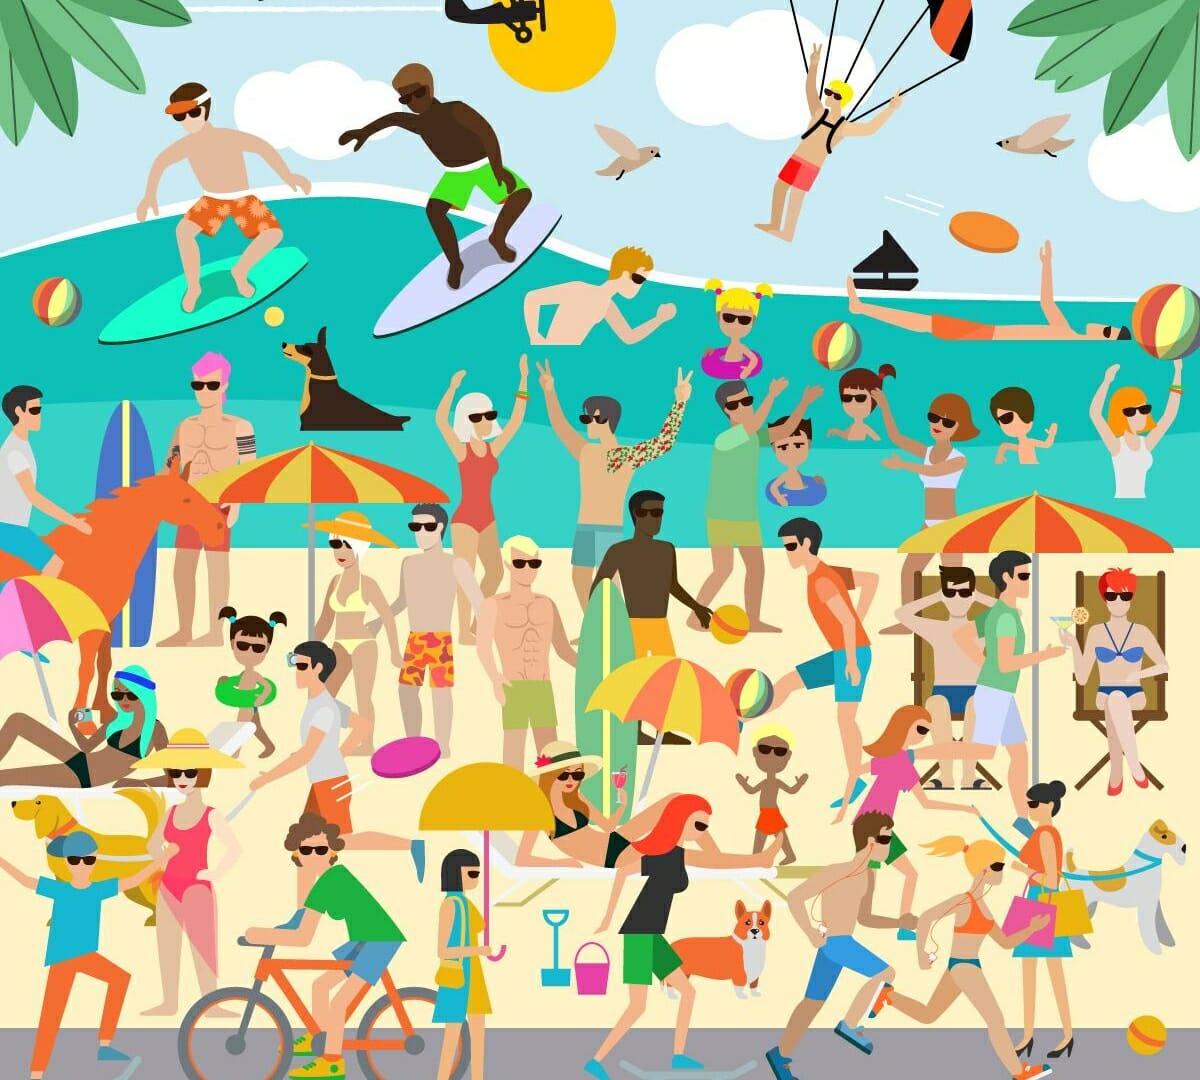 There’s an odd man out in this beach scene brain teaser... can YOU spot why?